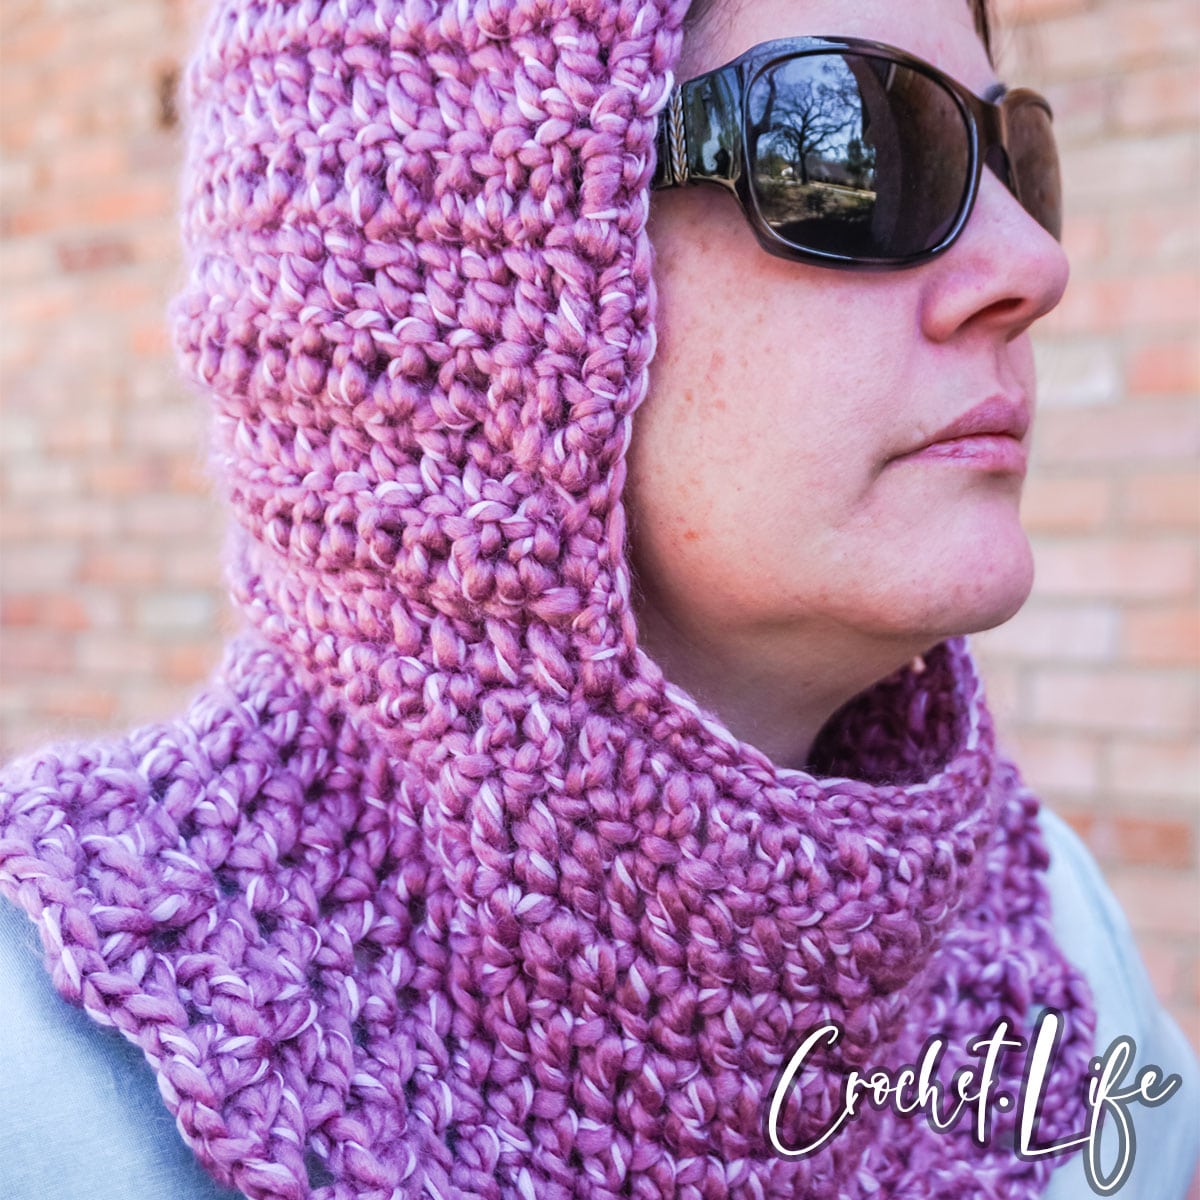 free crochet pattern for a hooded cowl with ruffles